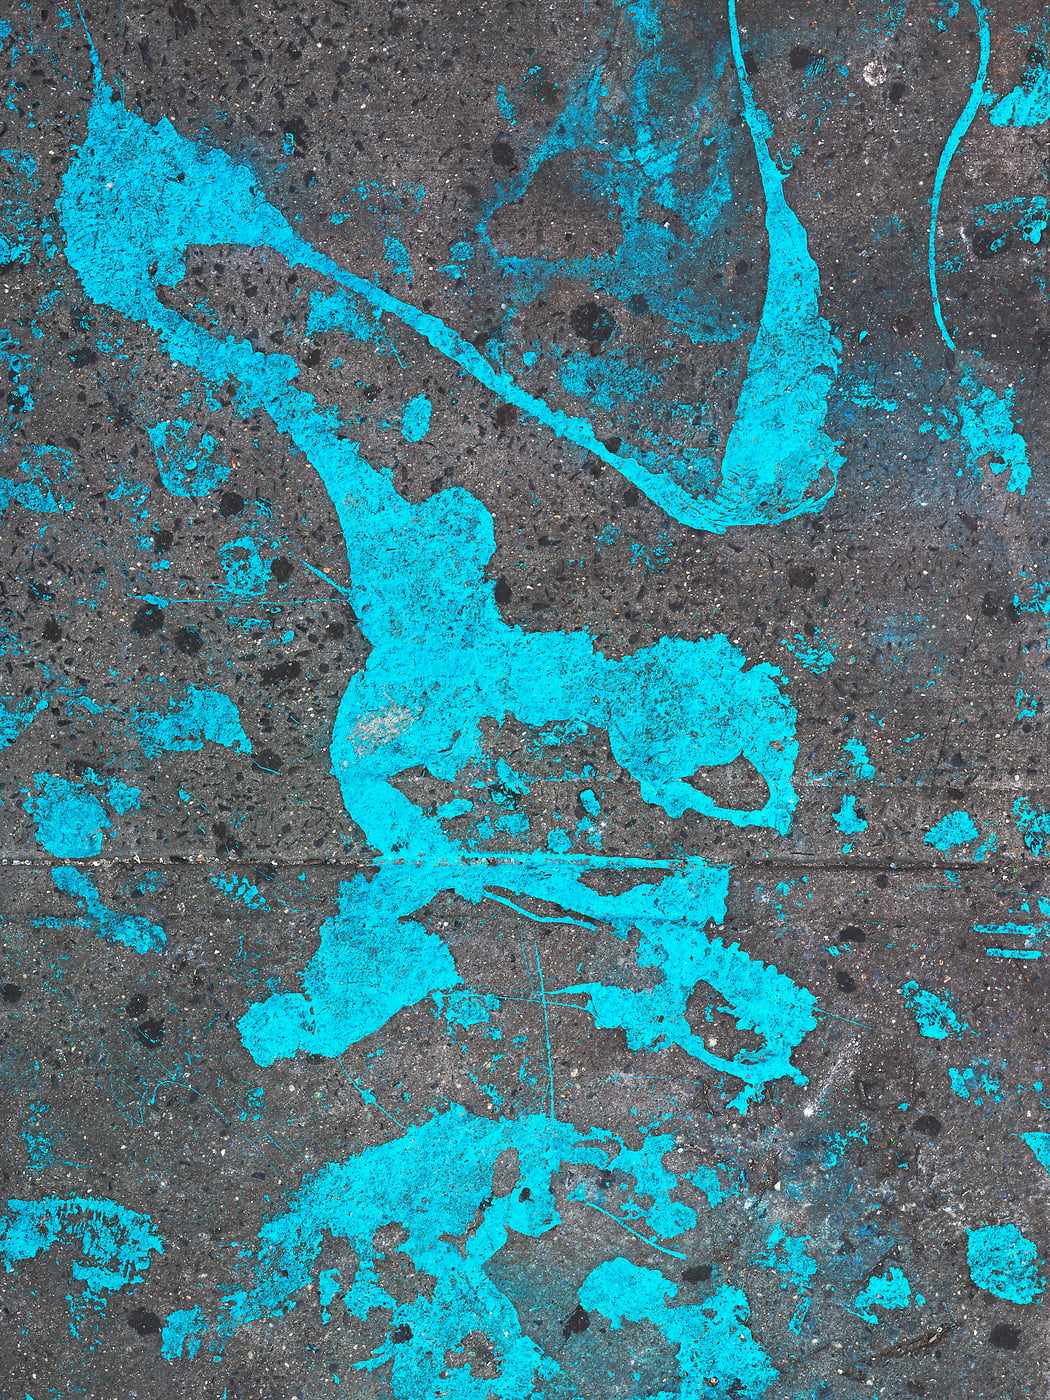 491 megapixels! A very high resolution, large-format VAST photo print of paint on the New York City Sidewalk; artistic abstract photograph created by Dan Piech in the Lower East Side neighborhood of Manhattan, New York City.